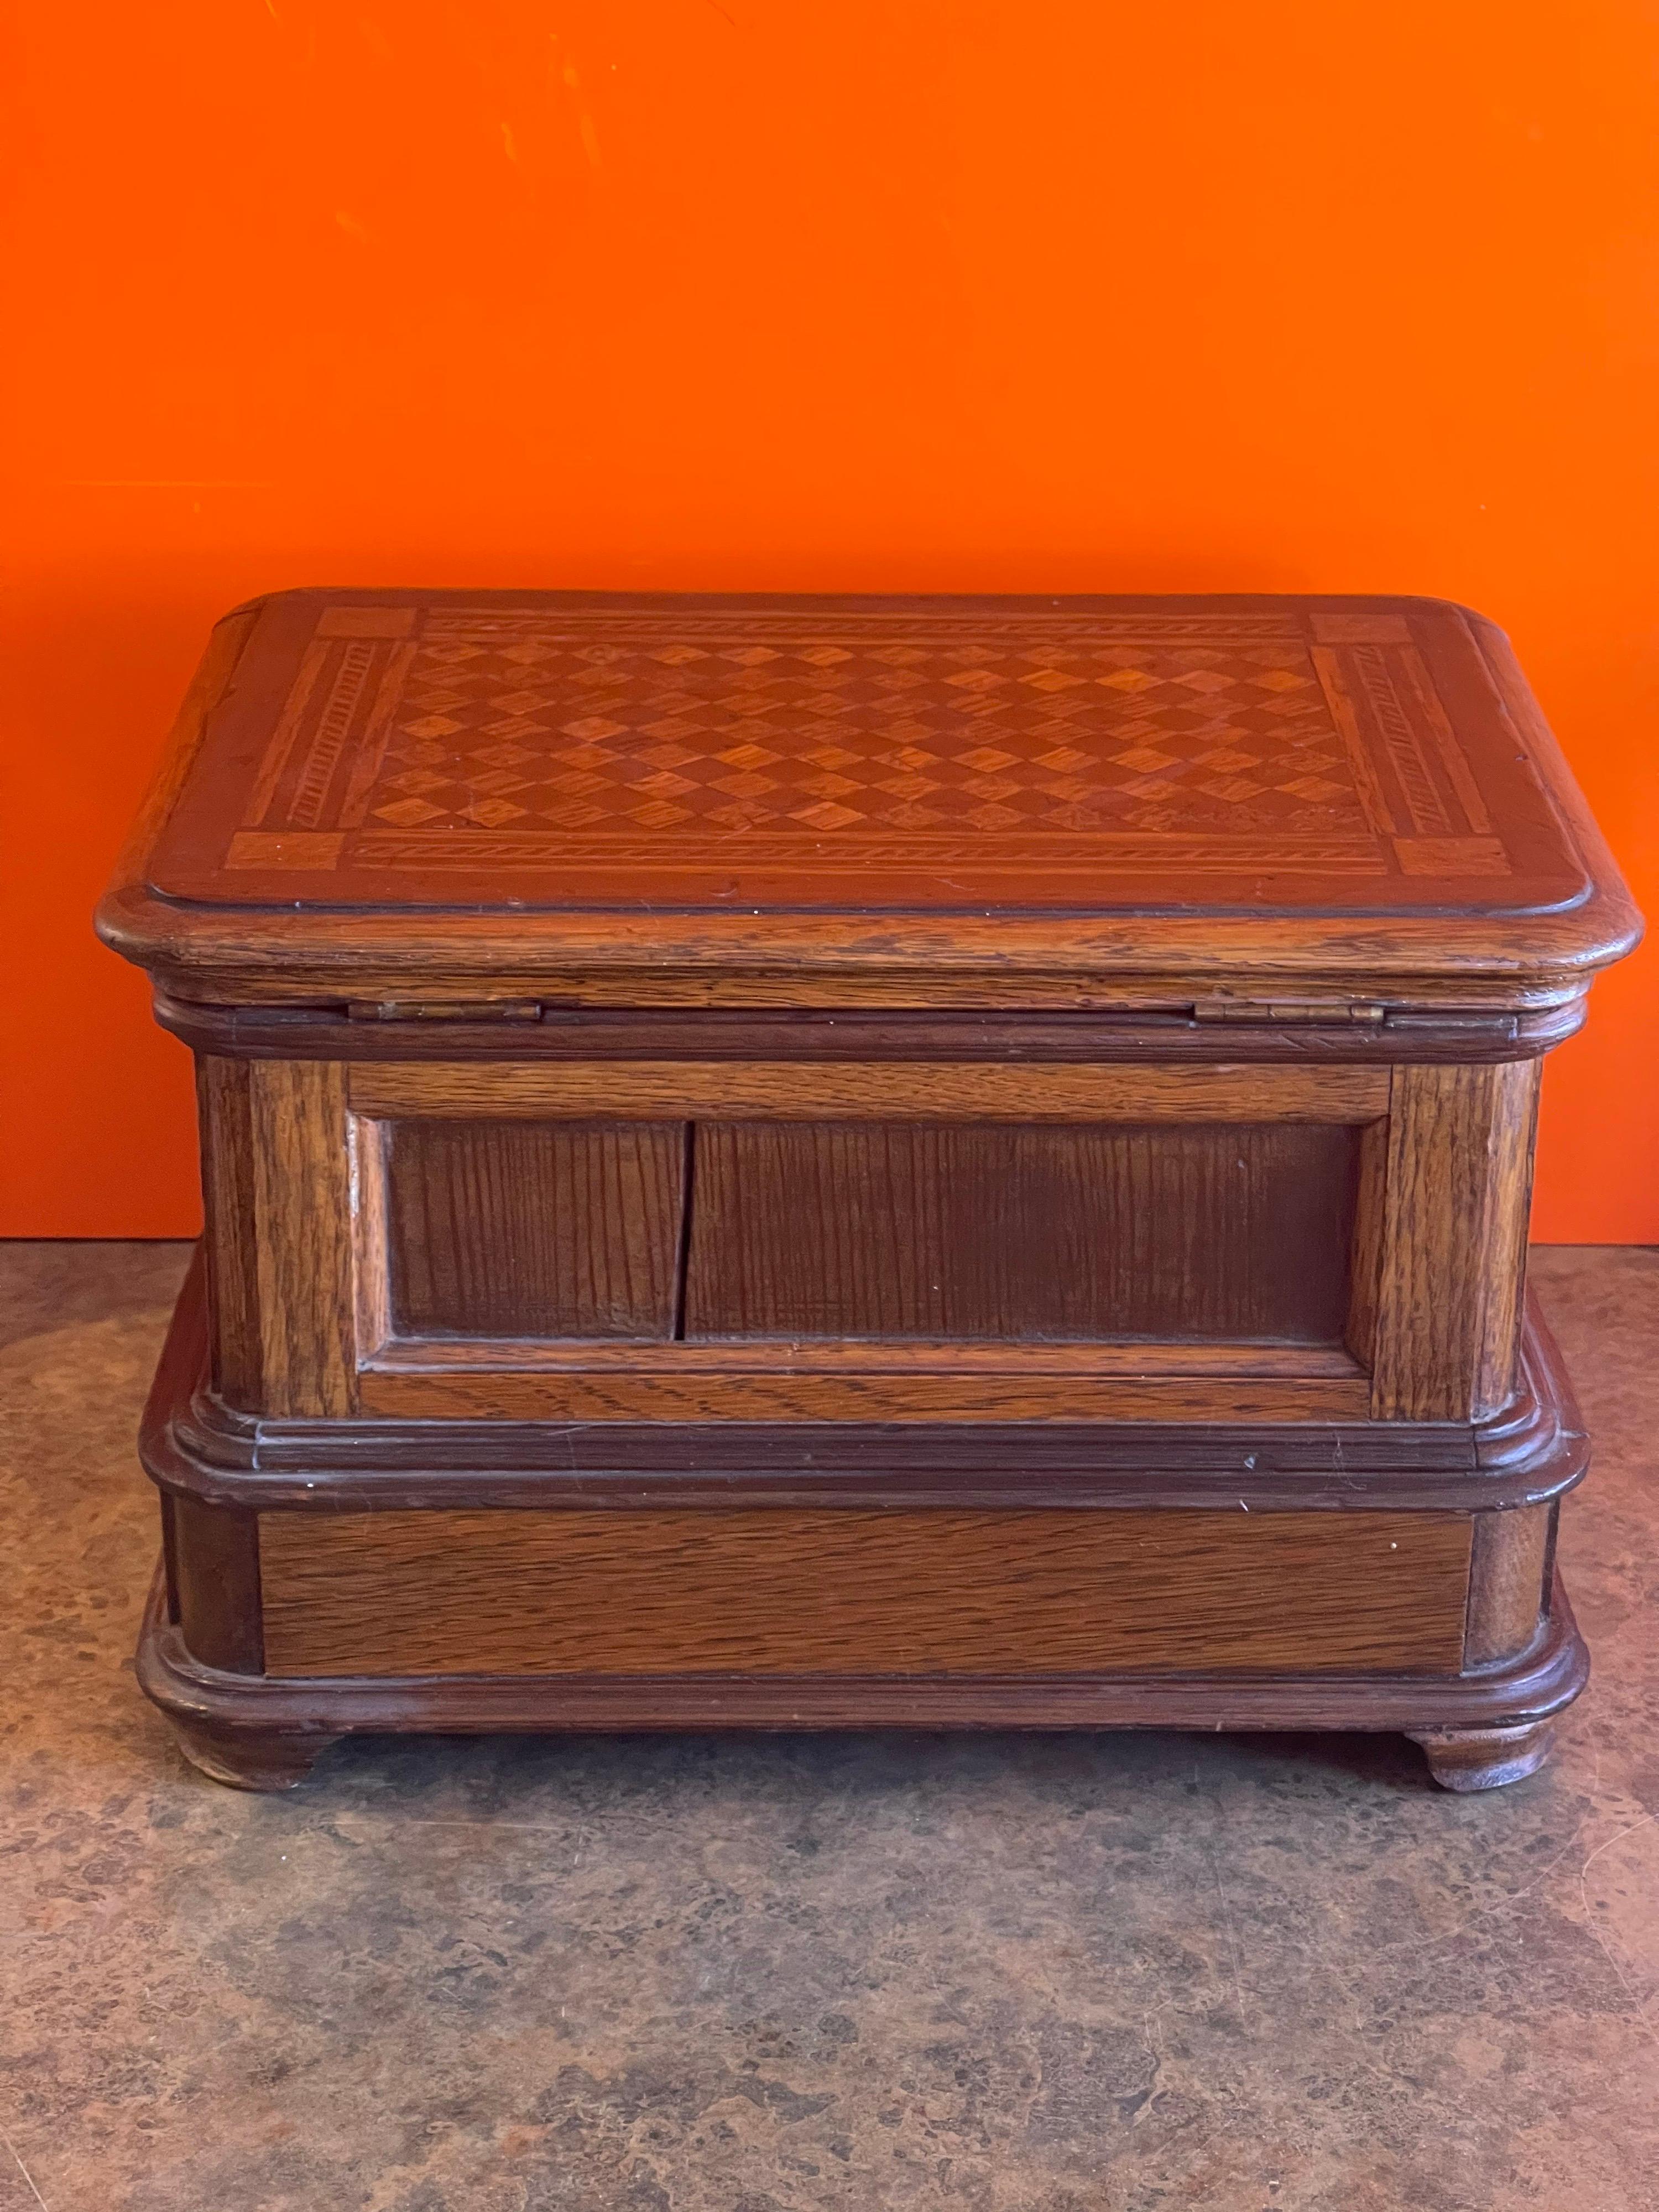 Mahogany Antique Jewelry Box with Inlaid Wood Top For Sale